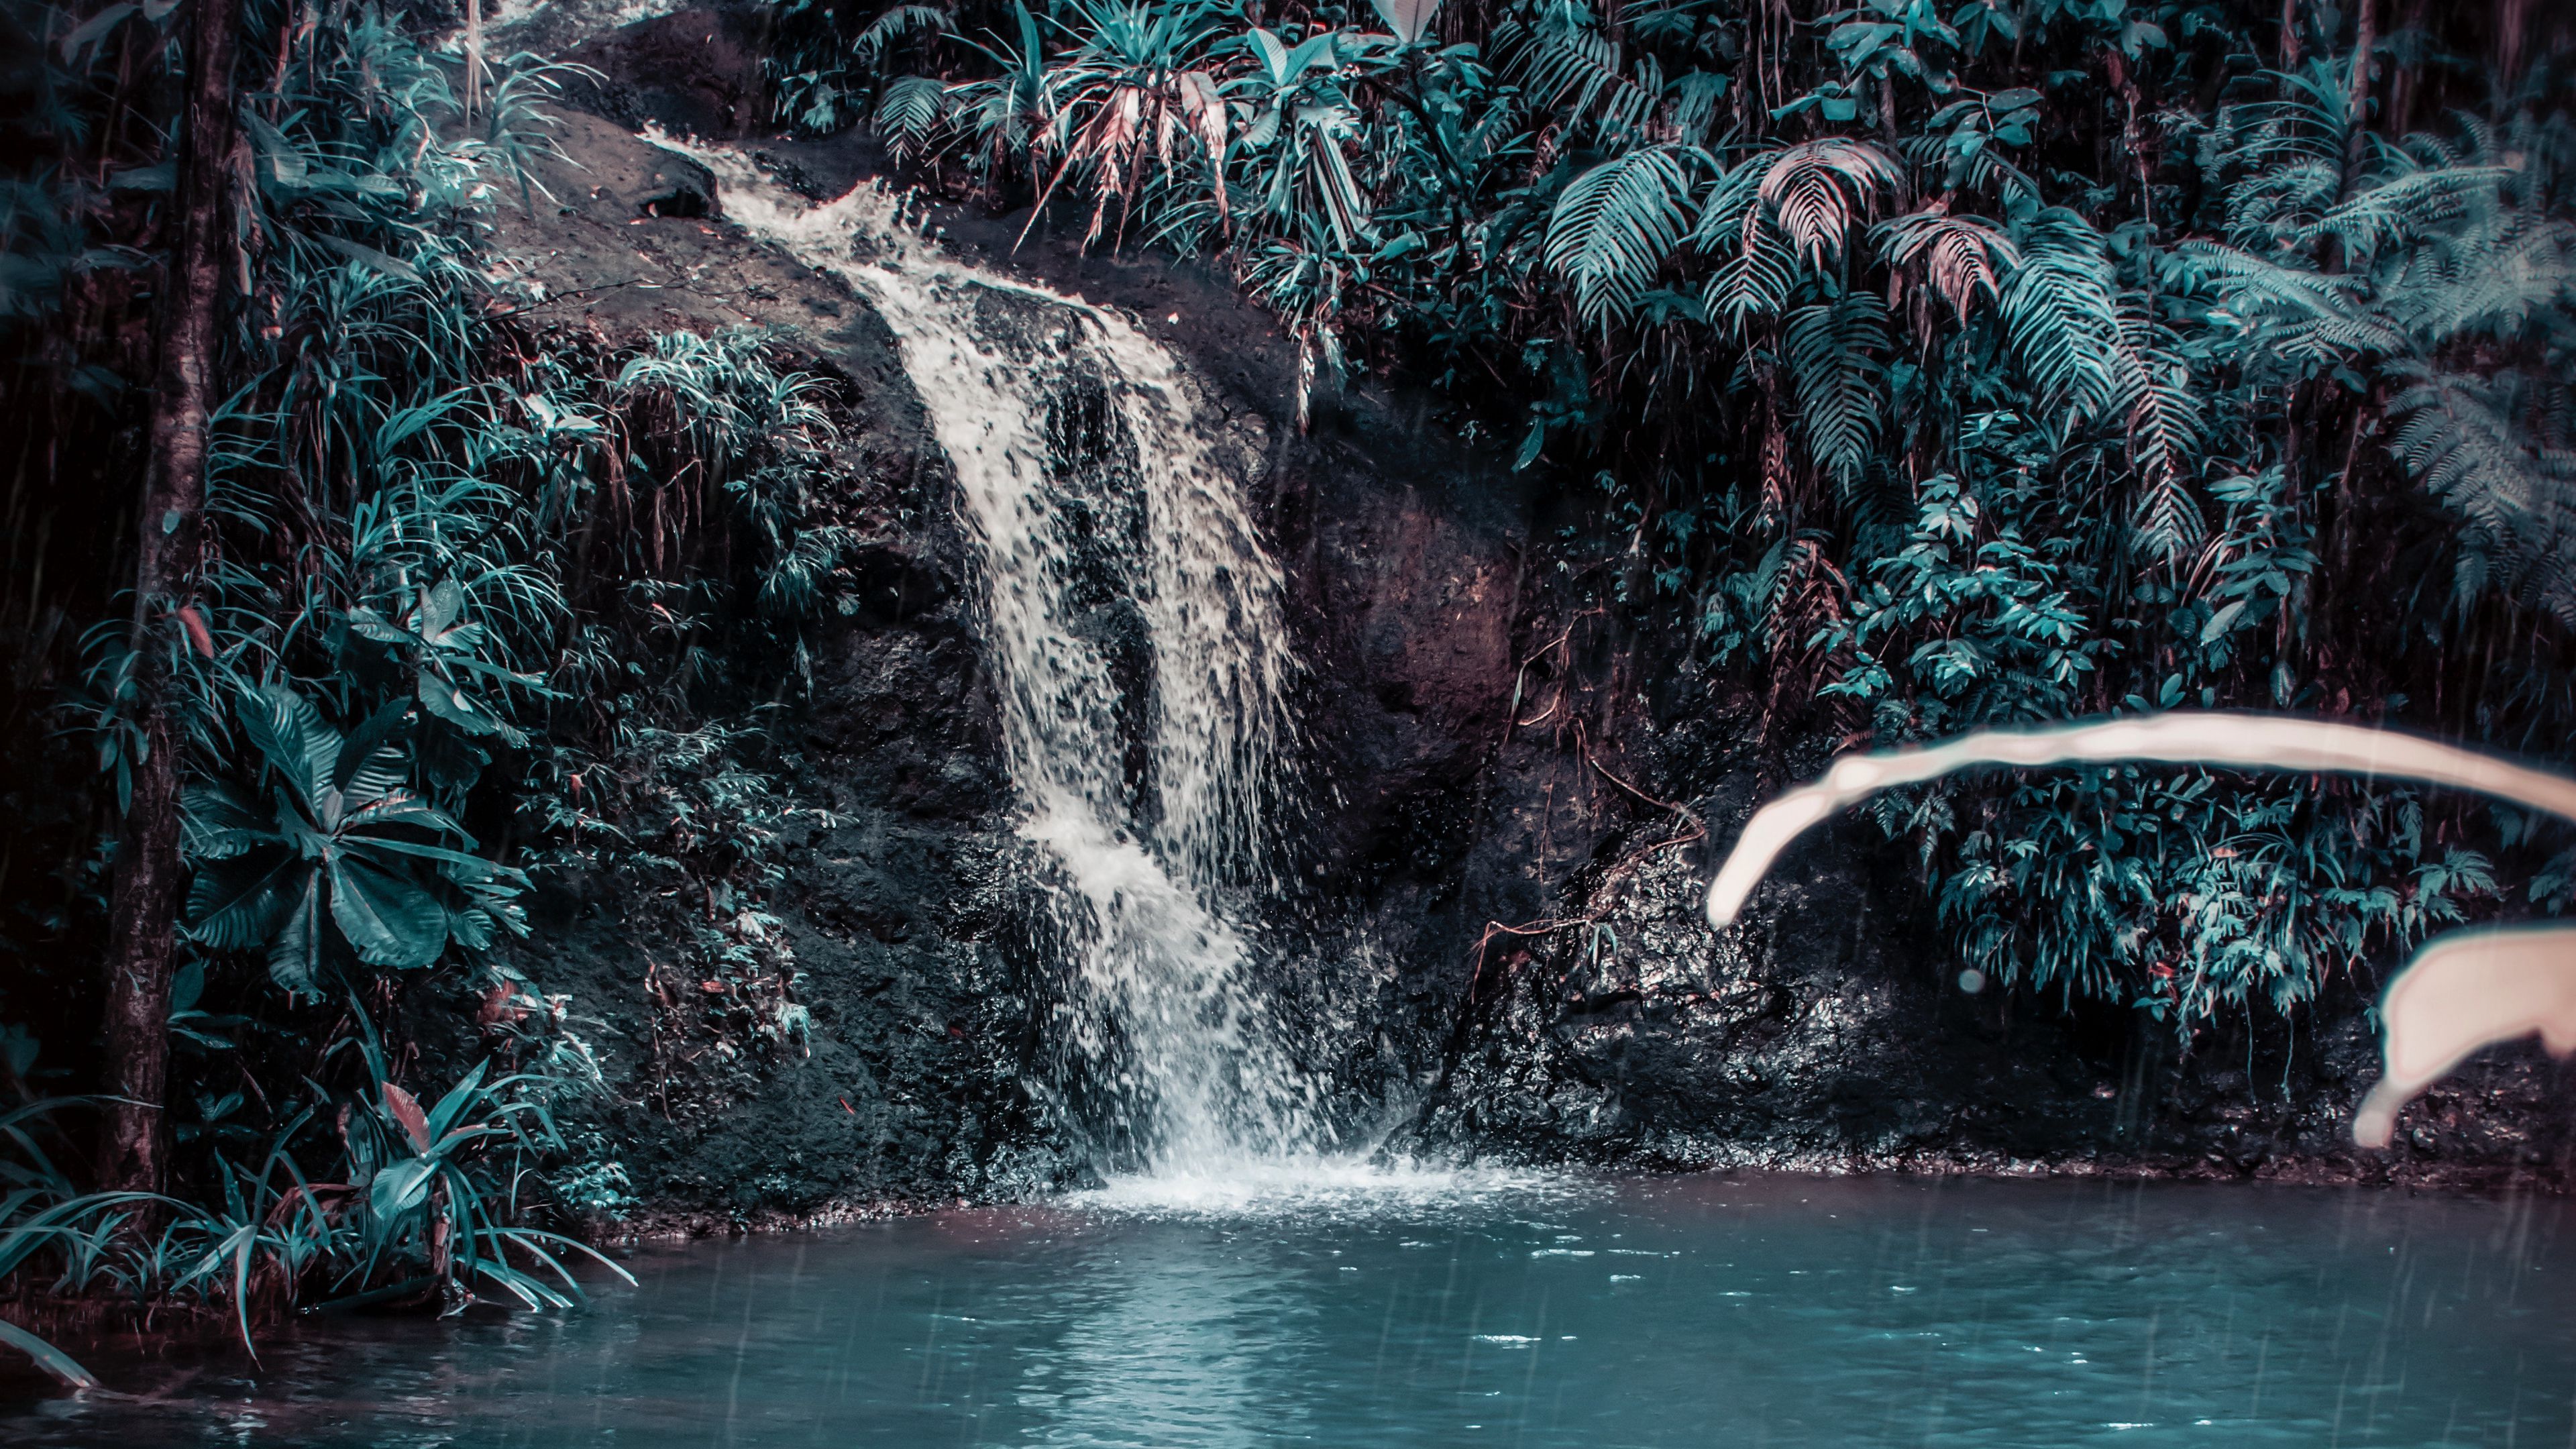 Download wallpaper 3840x2160 waterfall, stream, forest, jungle, tropical, spray, stones 4k uhd 16:9 HD background